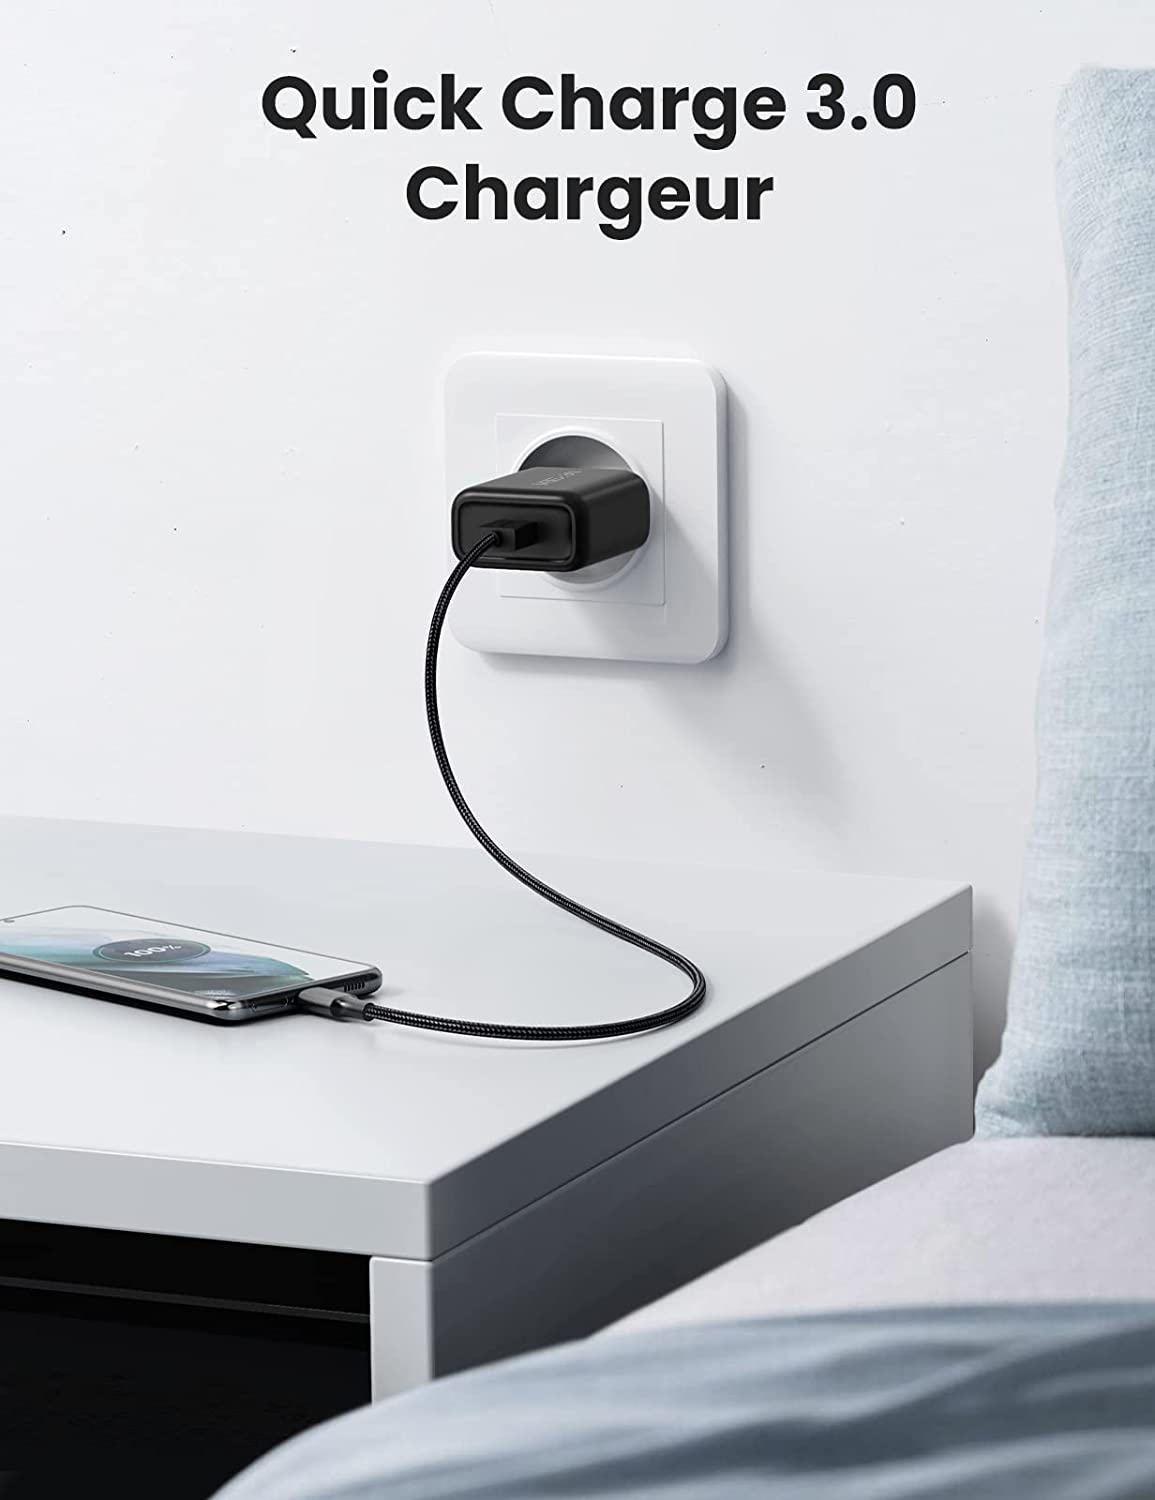 Chargeur UGREEN Secteur USB Quick Charge 3.0 Compatible avec iPhone Galaxy Google Xiaomi Redmi Poco Huawei Honor Oneplus HTC LG Oppo (Noir) 7